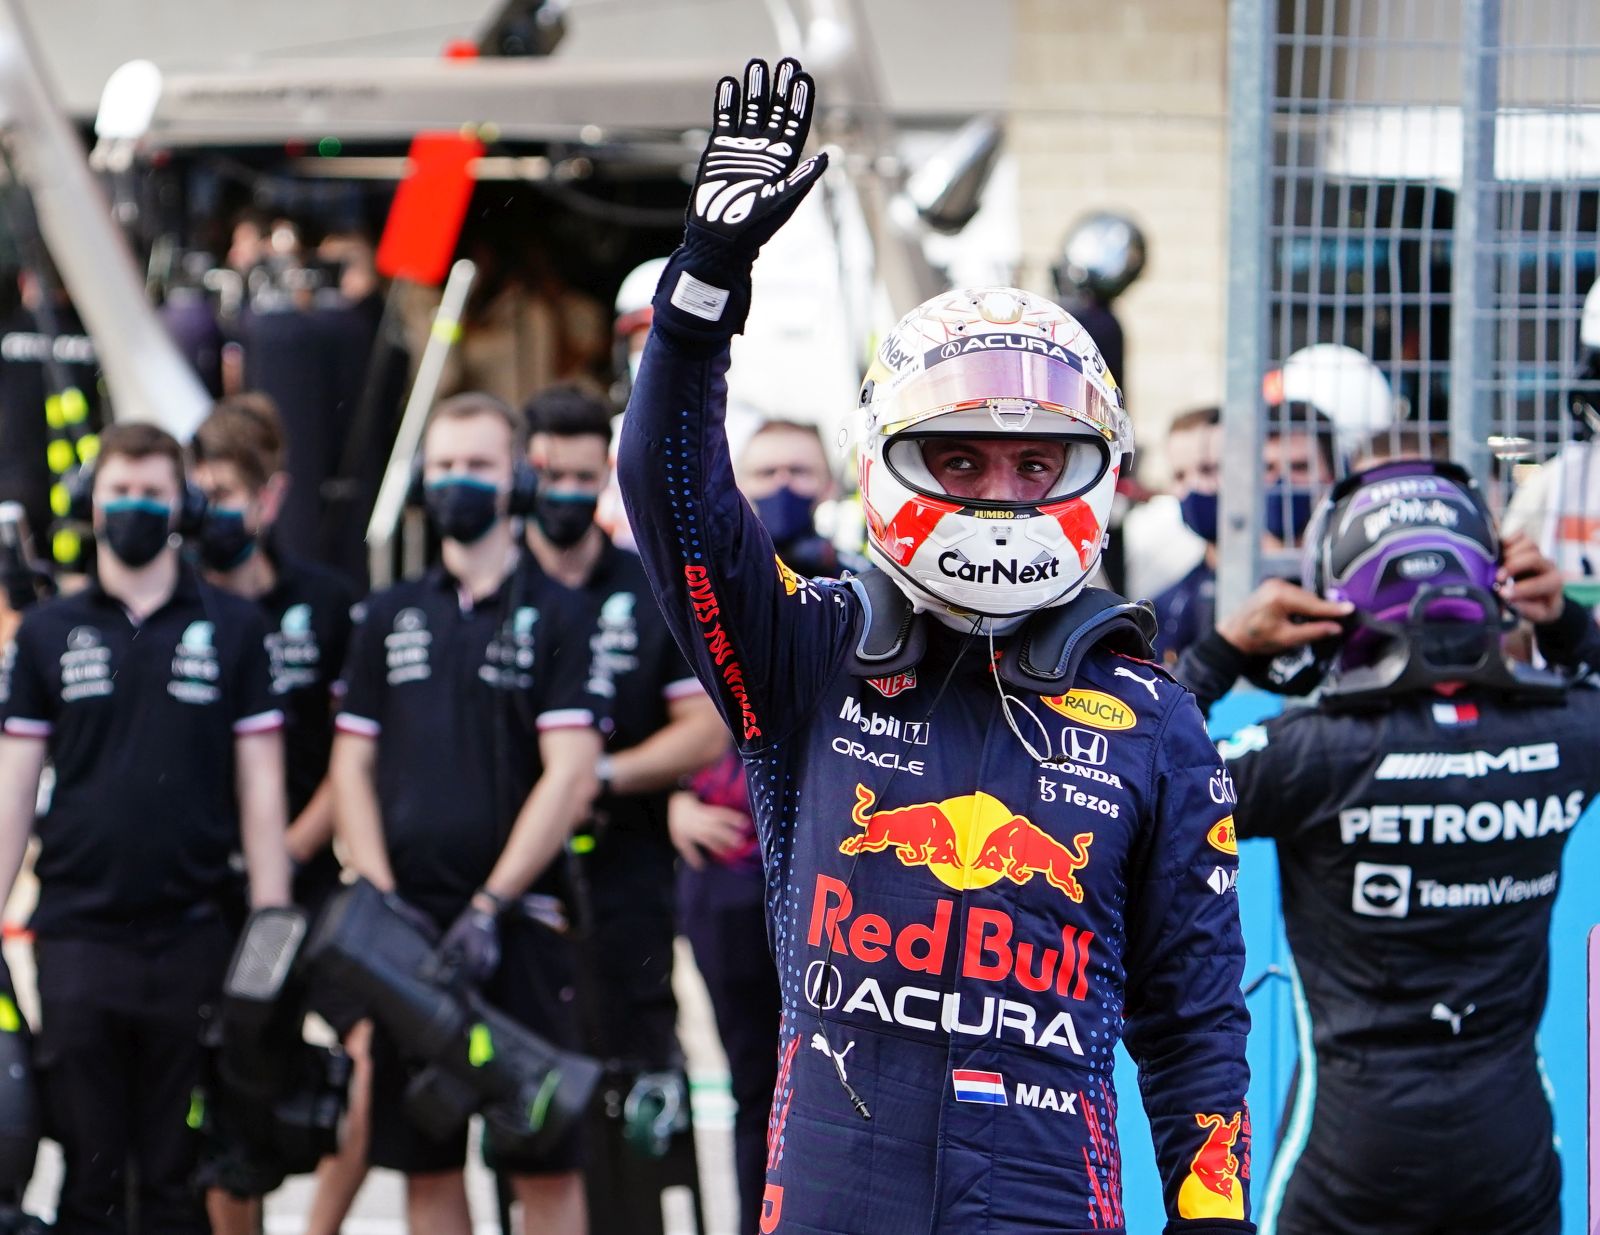 epaselect epa09542356 Dutch Formula One driver Max Verstappen of Red Bull Racing waves after the qualification session of the Formula One Grand Prix of the US at the Circuit of The Americas in Austin, Texas, USA, 23 October 2021. The Formula 1 United States Grand Prix 2021 is held on 24 October 2021. Dutch Formula One driver Max Verstappen took pole position in the qualifying session.  EPA/SHAWN THEW